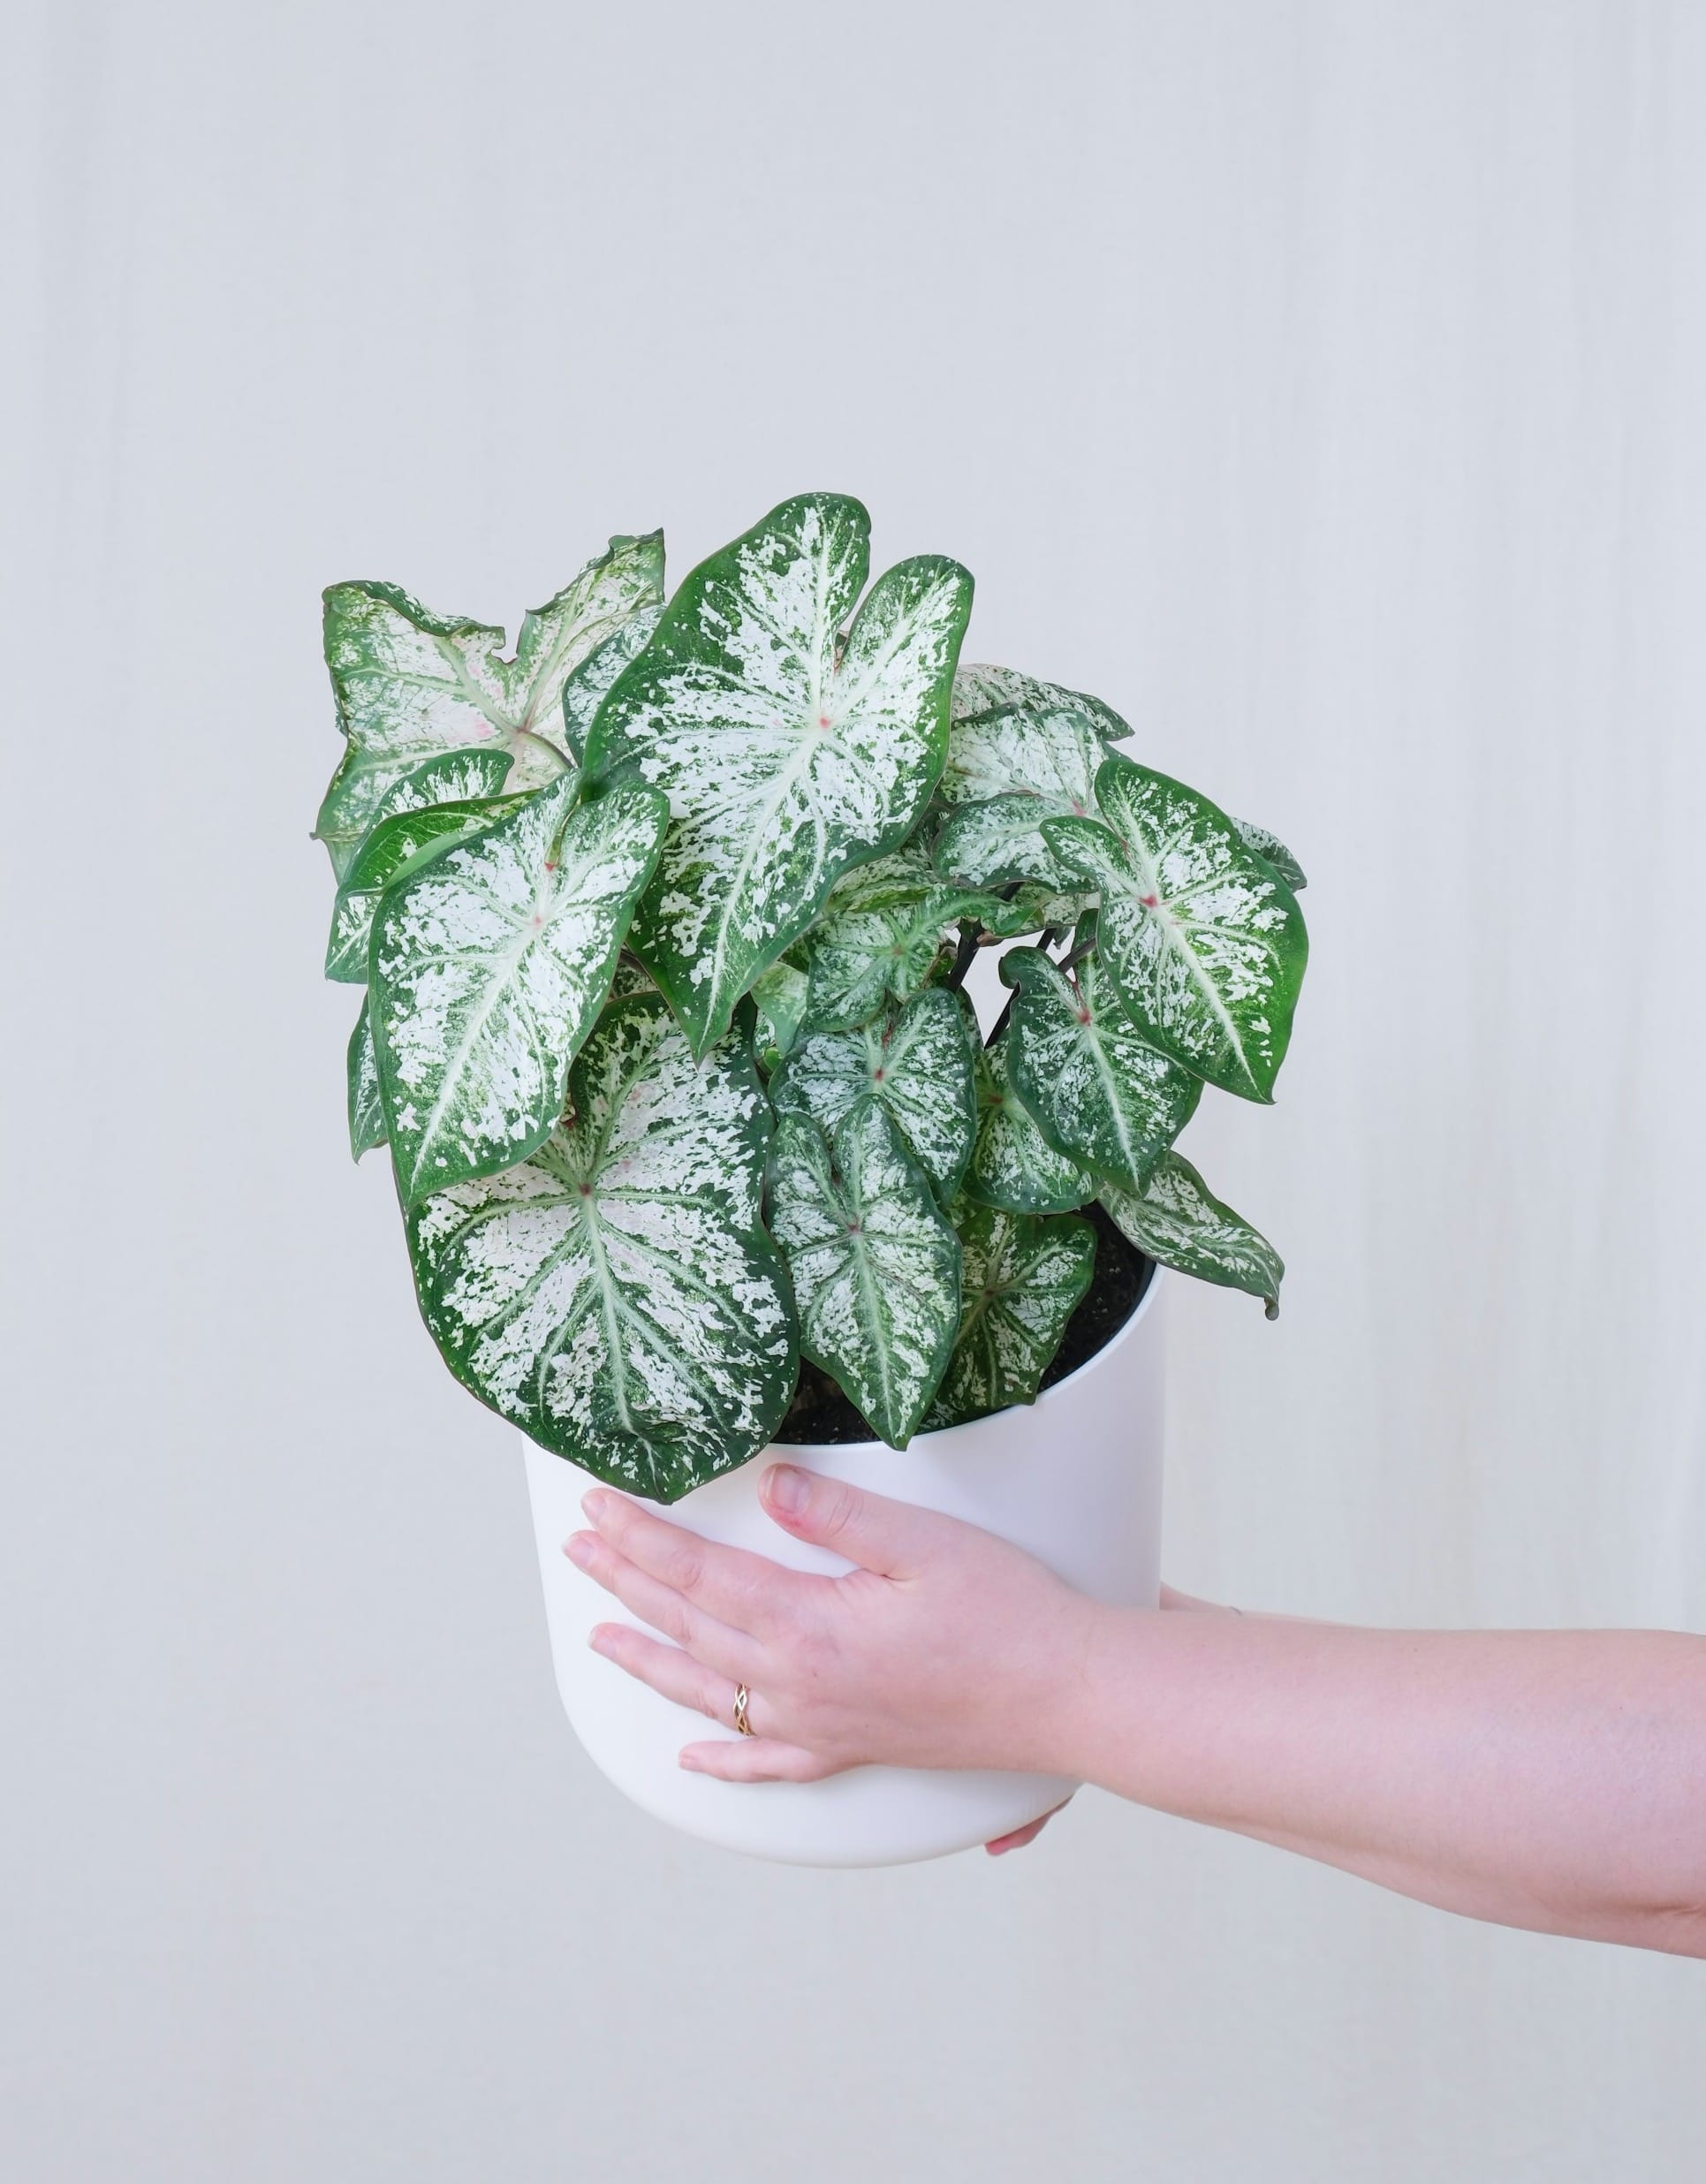 a person holding a potted caladium with white leaves